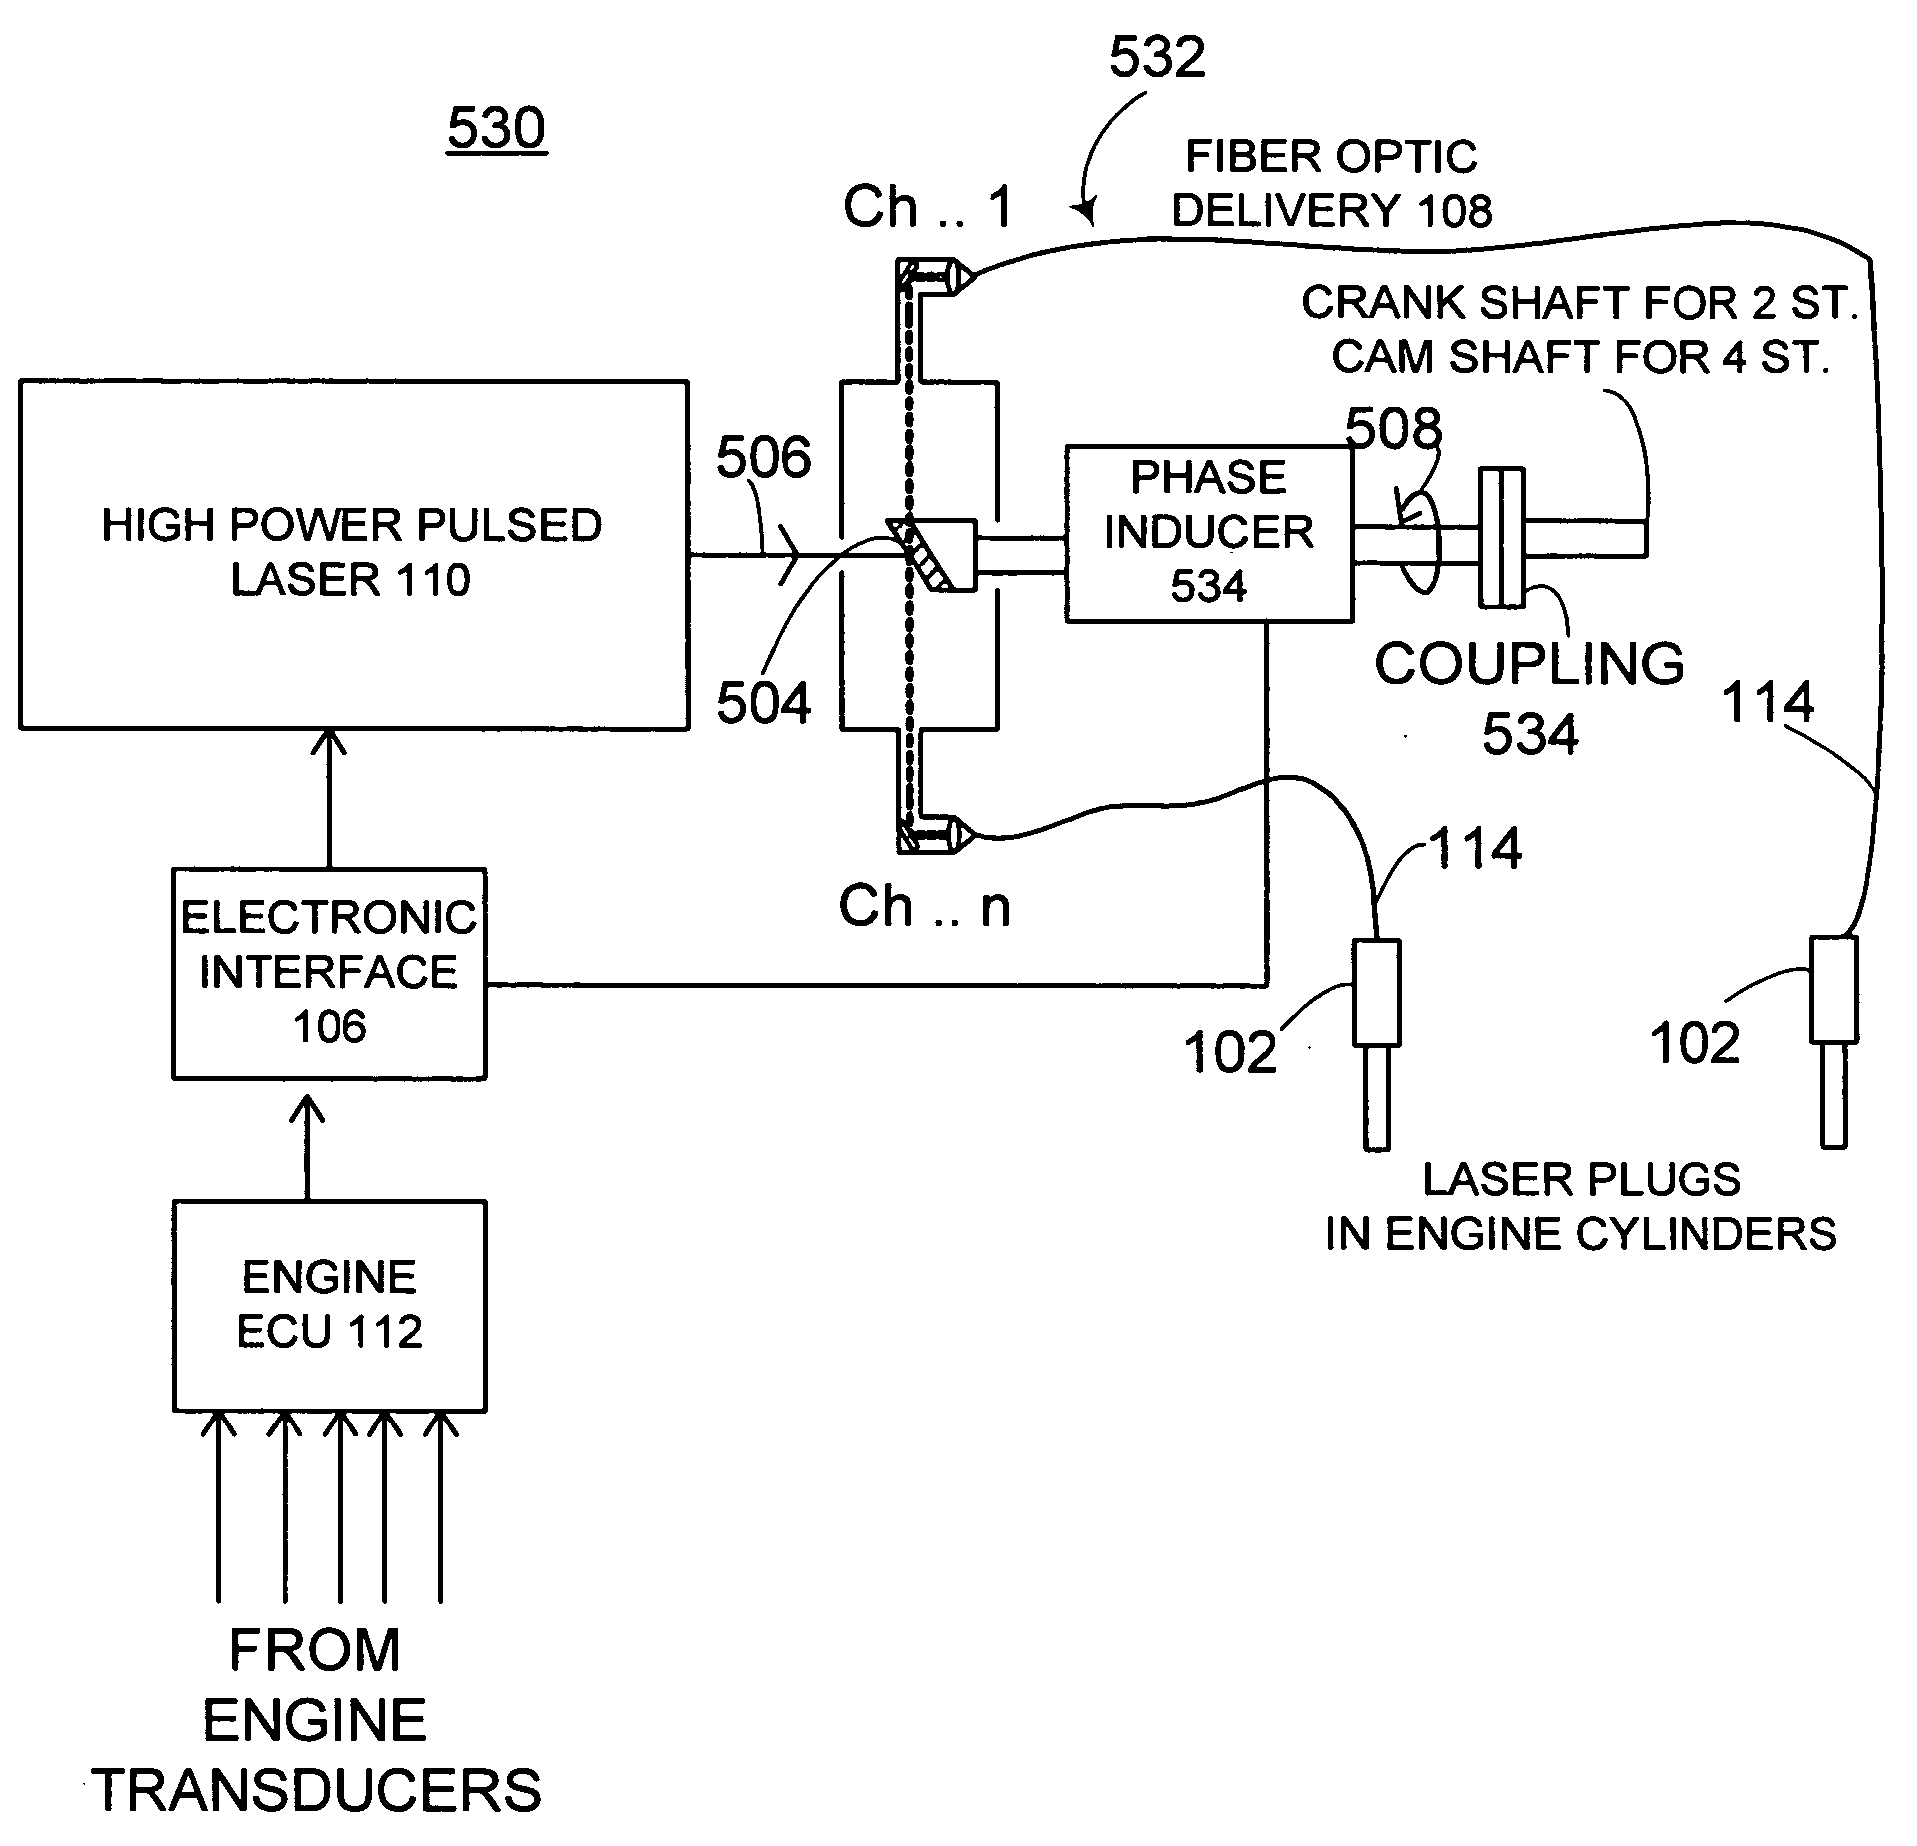 Laser based ignition system for natural gas reciprocating engines, laser based ignition system having capability to detect successful ignition event; and distributor system for use with high-powered pulsed lasers